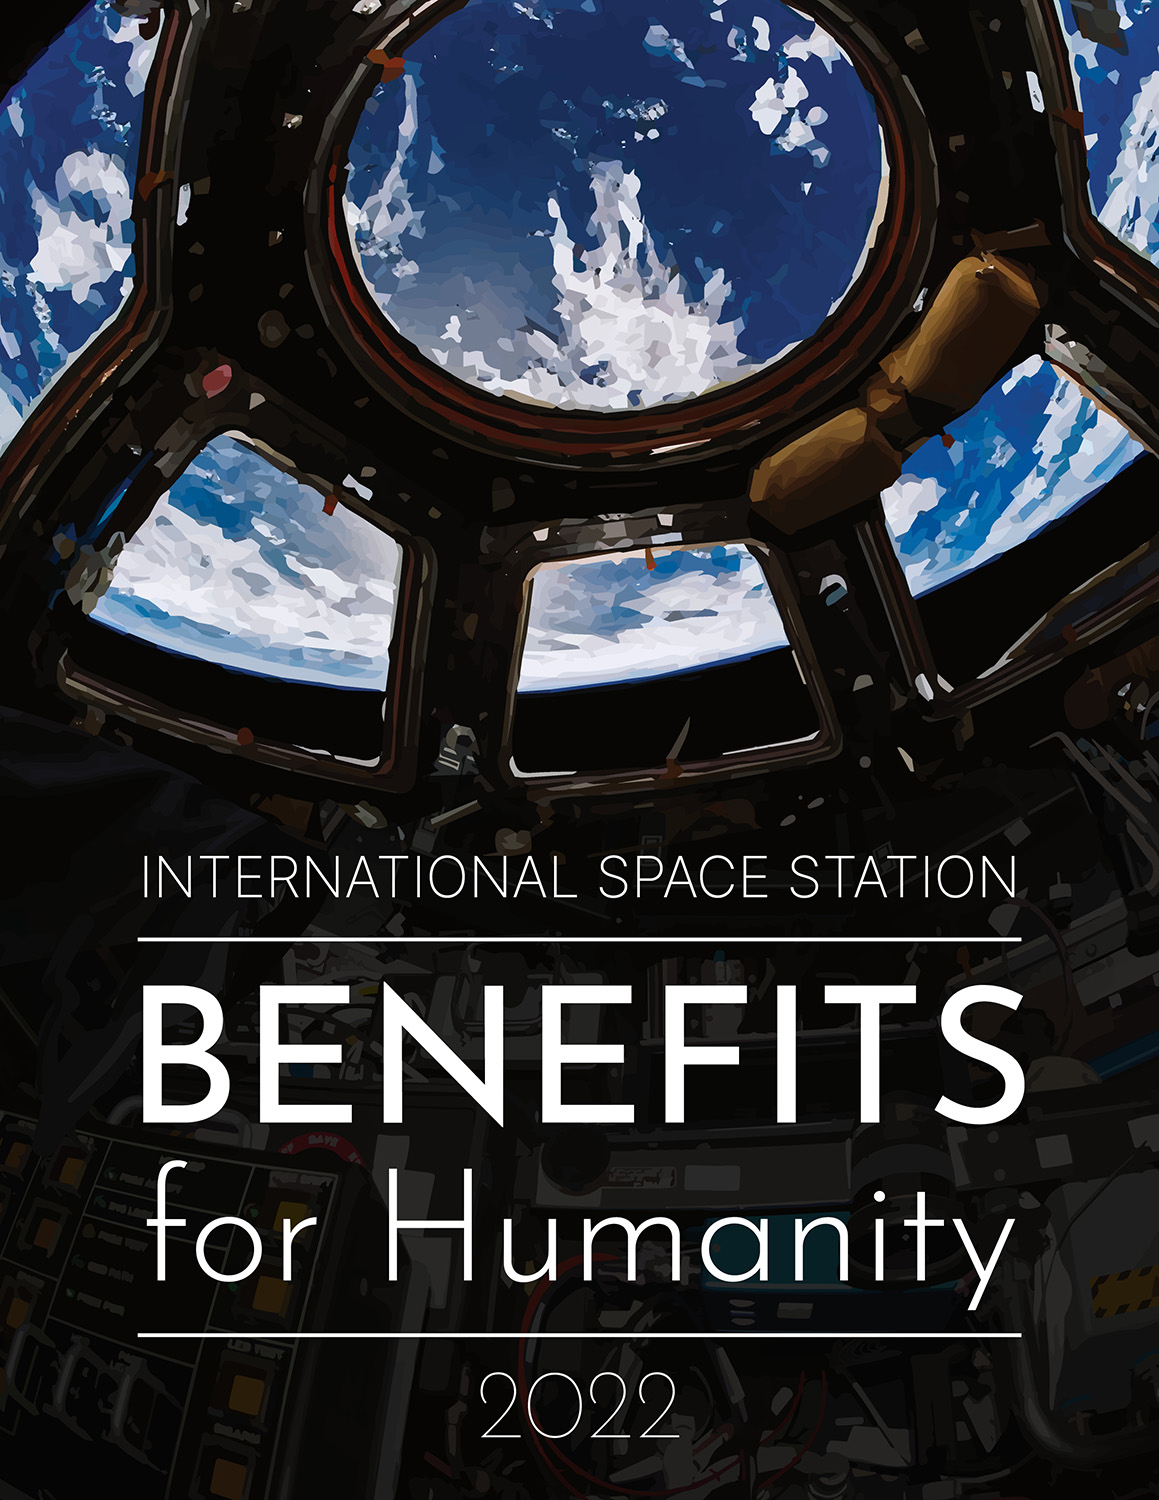 Benefits for Humanity Bookcover